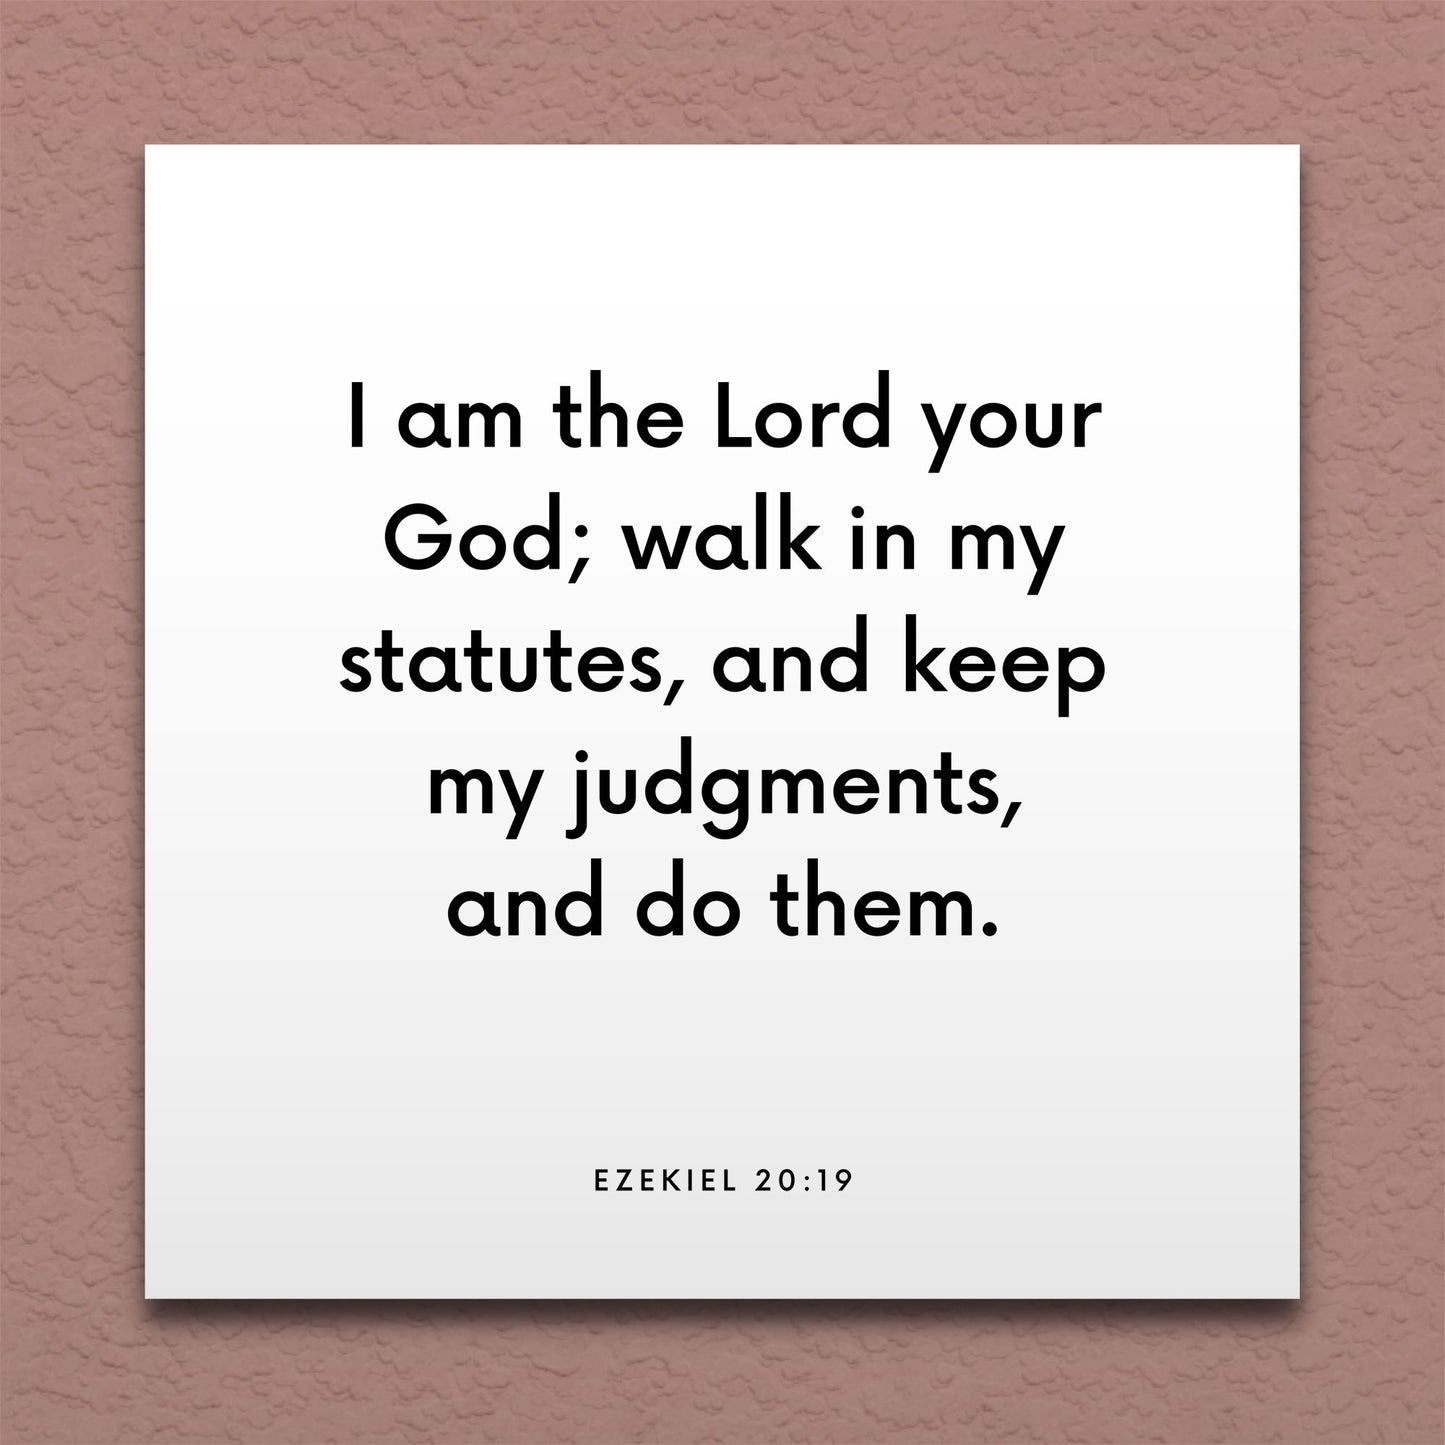 Wall-mounted scripture tile for Ezekiel 20:19 - "I am the Lord your God; walk in my statutes"